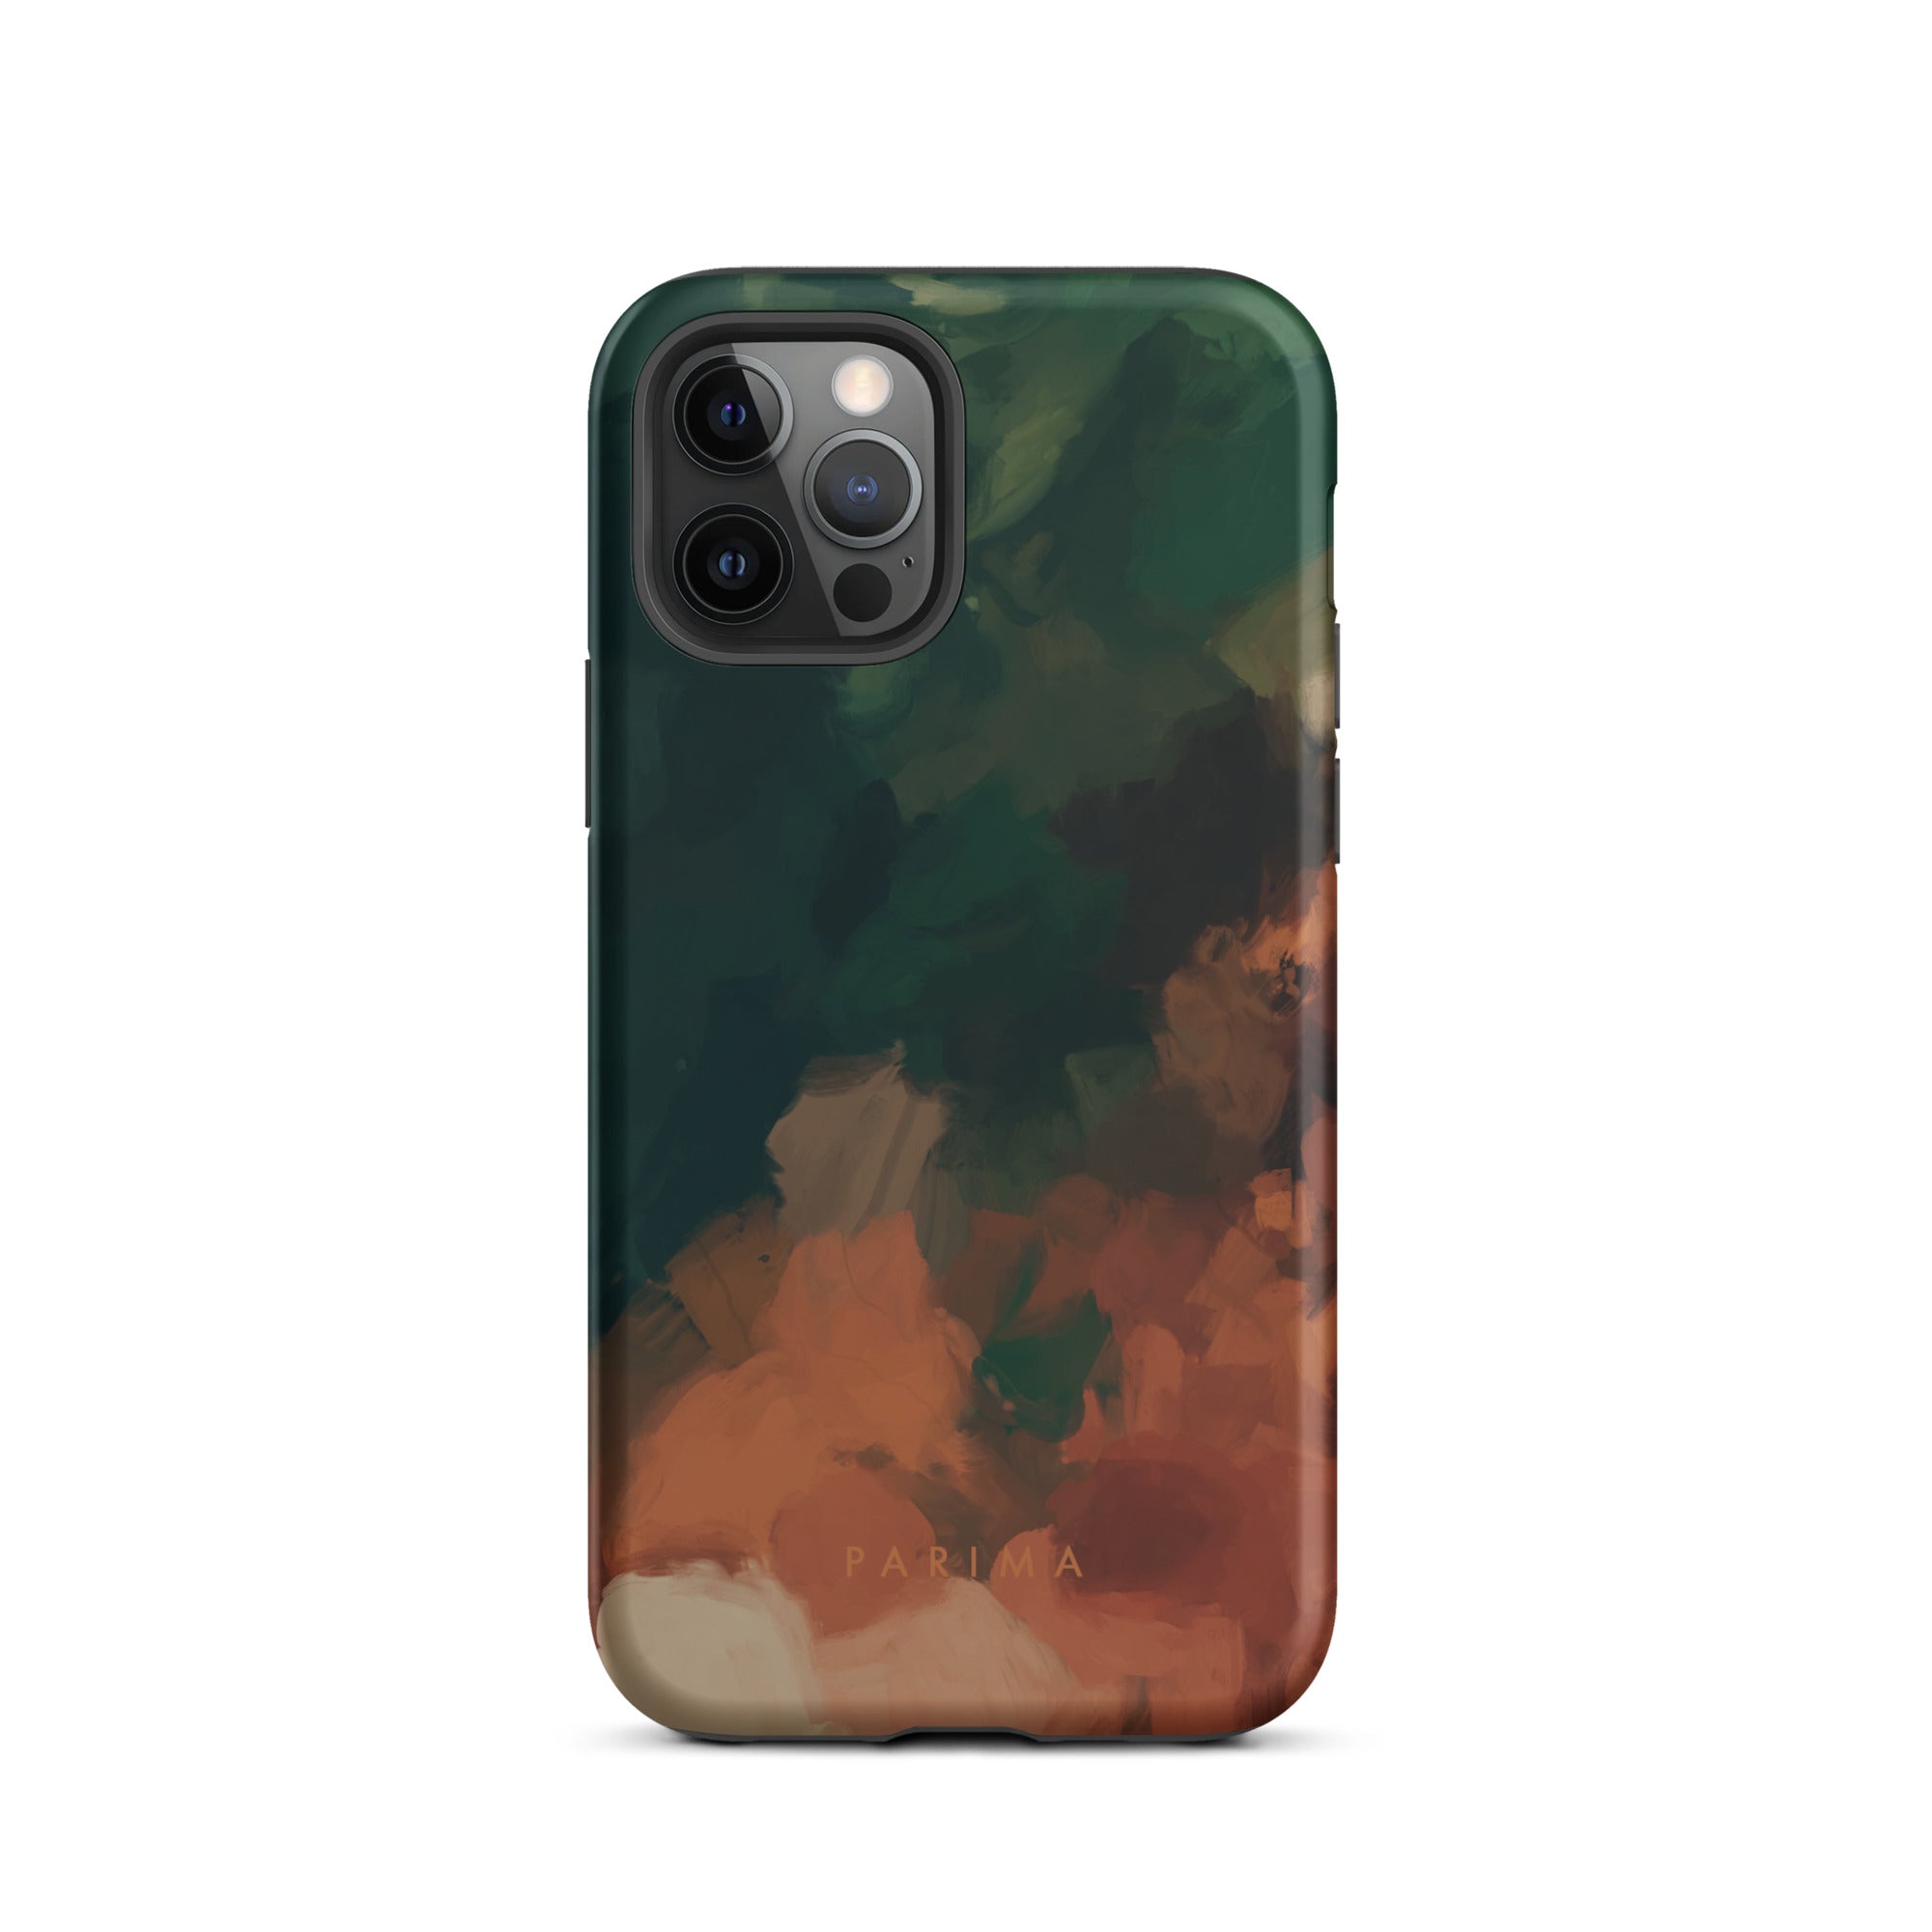 Cedar, green and brown abstract art - iPhone 12 Pro tough case by Parima Studio